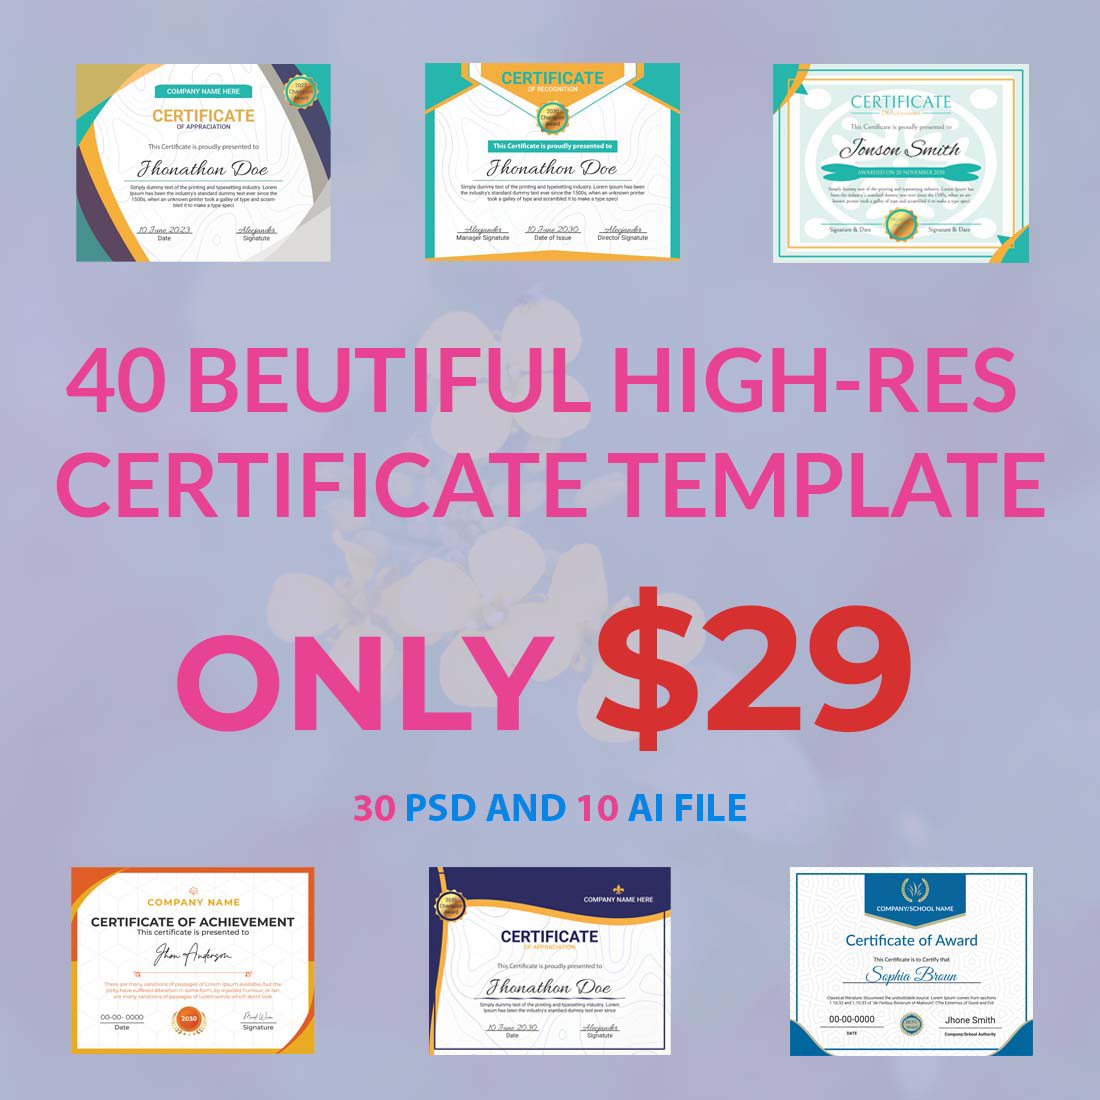 Bunch of certificates with a price tag.